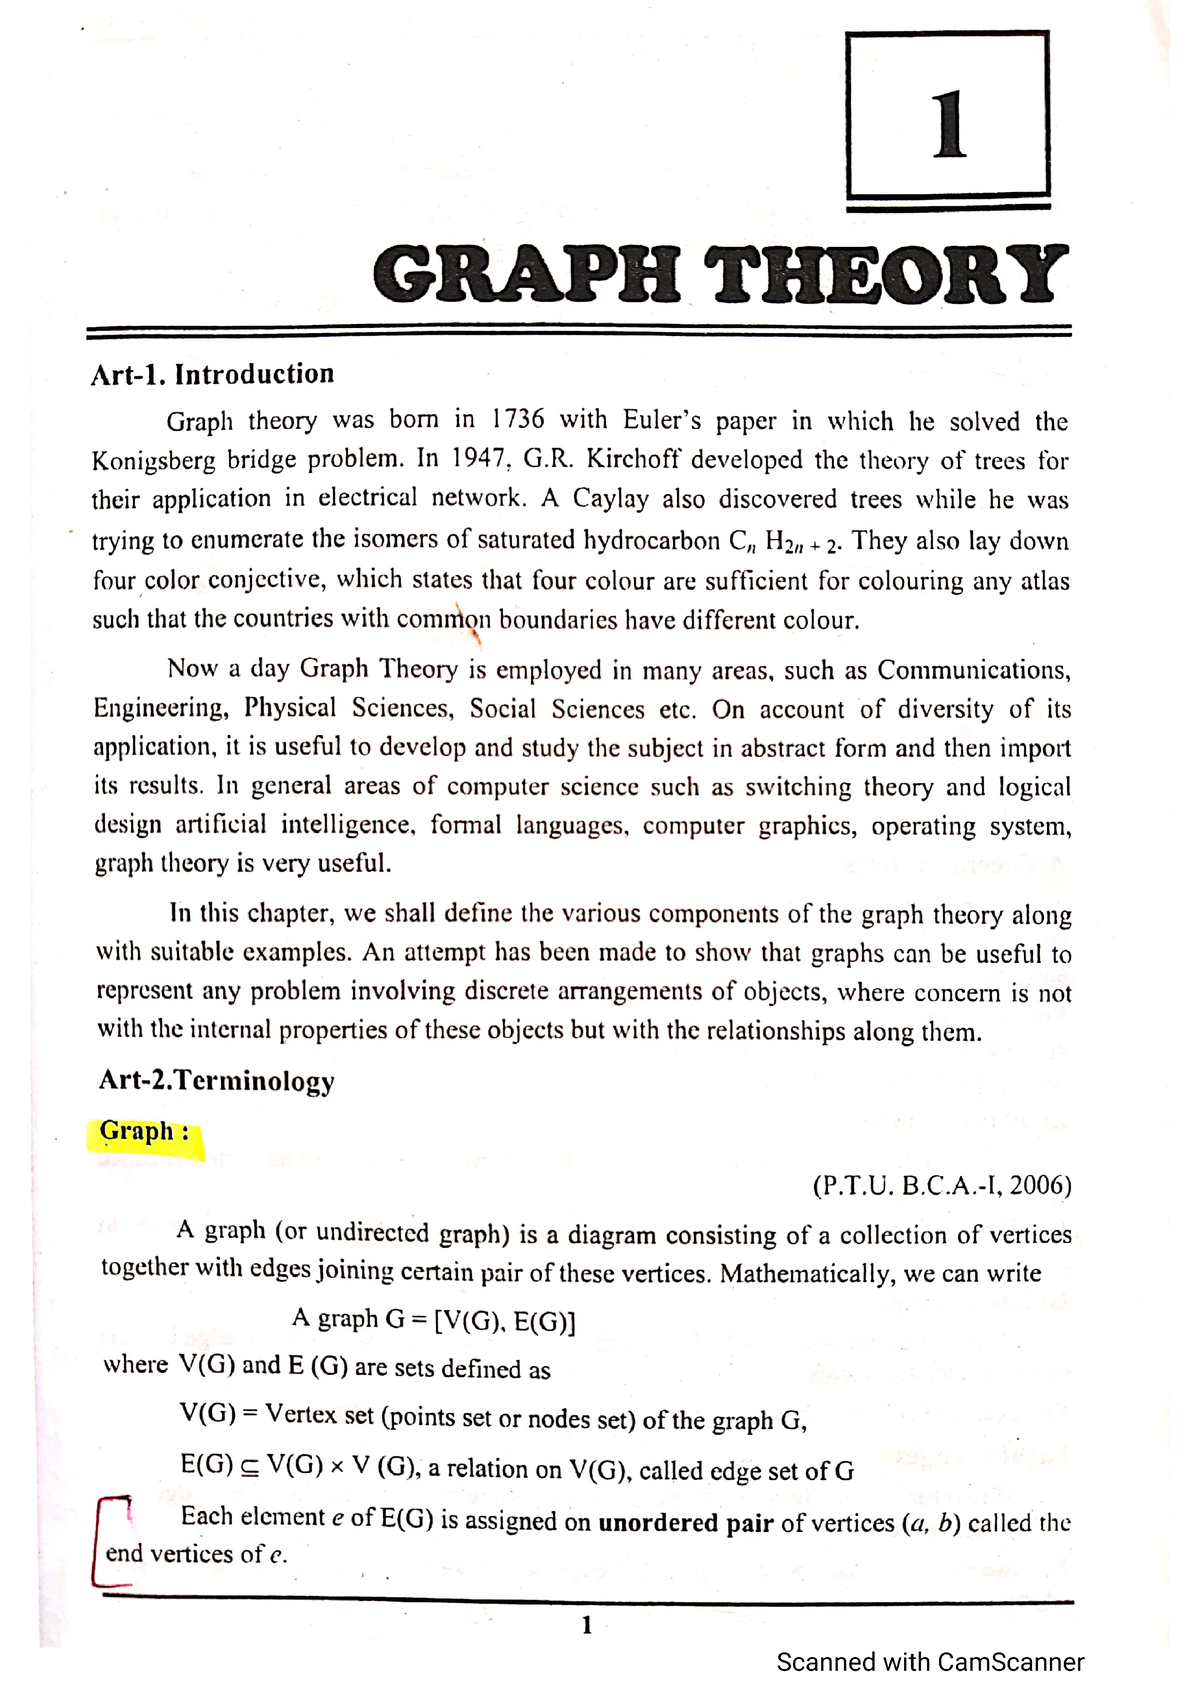 graph theory essay